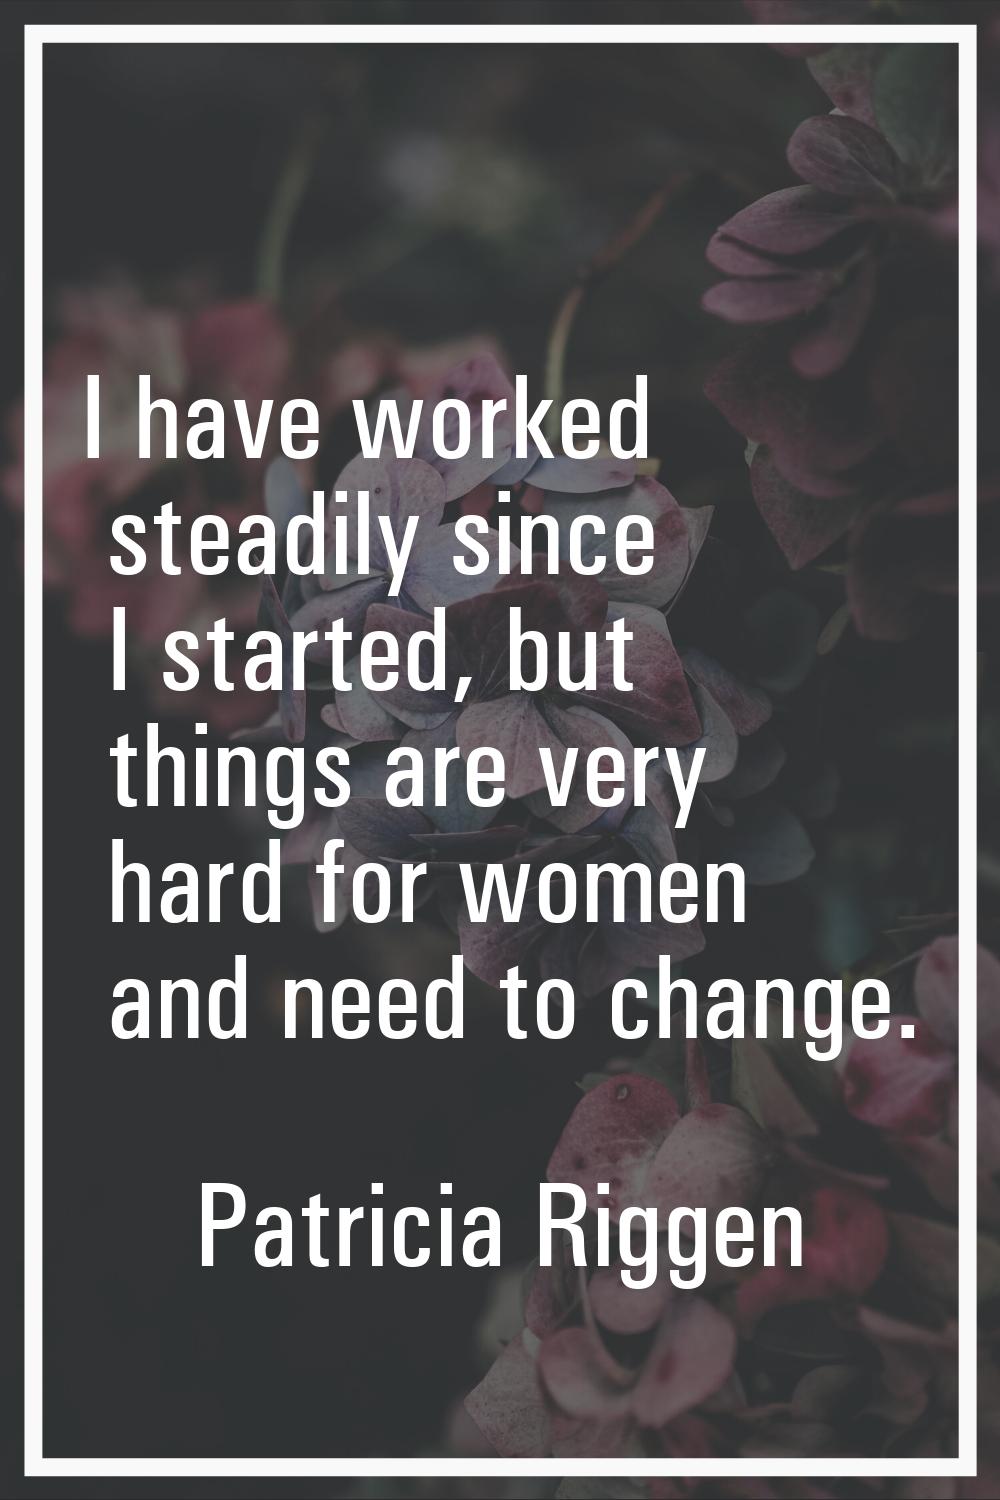 I have worked steadily since I started, but things are very hard for women and need to change.